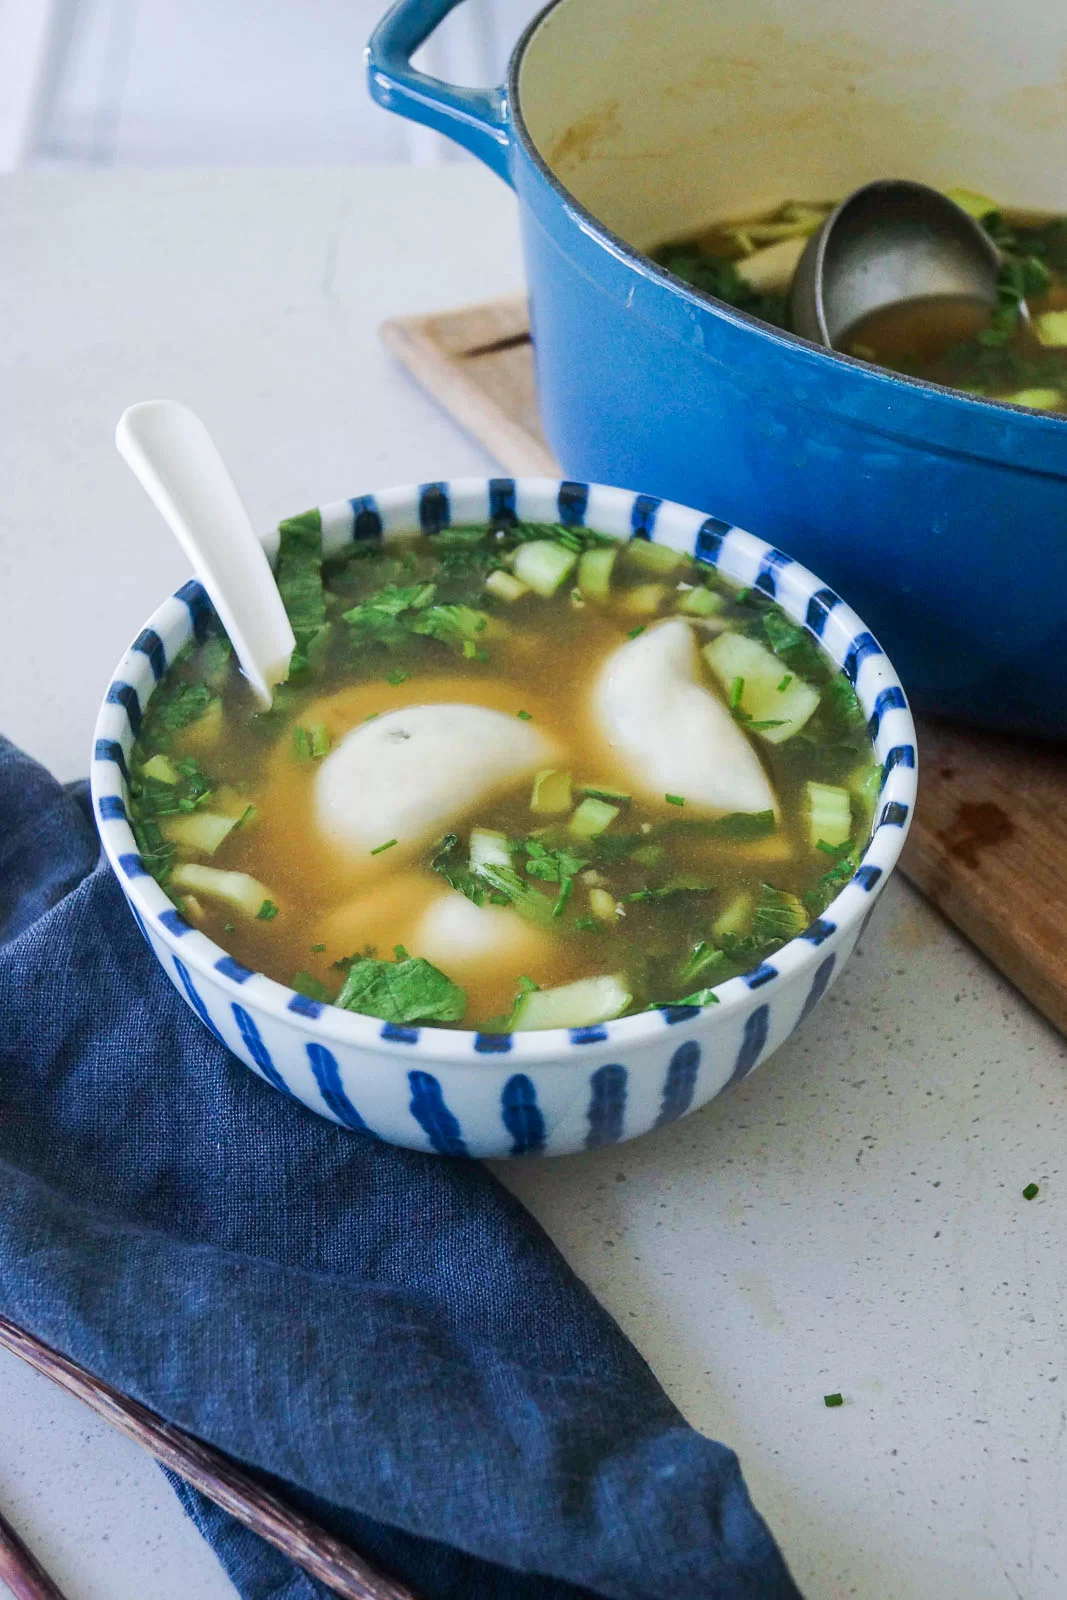 Dumpling soup with lots of greens